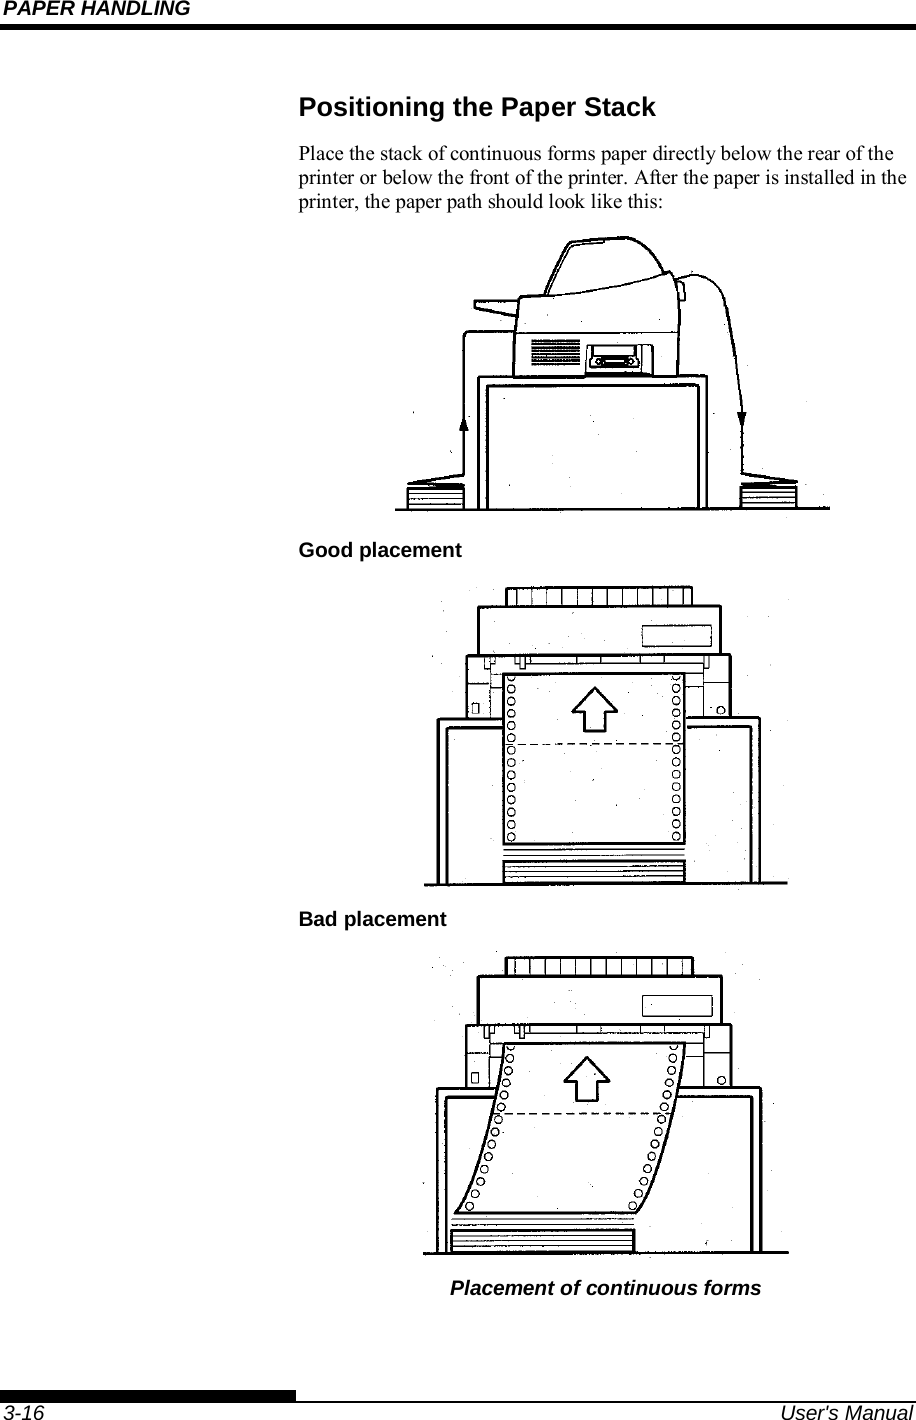 PAPER HANDLING    3-16  User&apos;s Manual Positioning the Paper Stack Place the stack of continuous forms paper directly below the rear of the printer or below the front of the printer. After the paper is installed in the printer, the paper path should look like this:  Good placement  Bad placement  Placement of continuous forms 